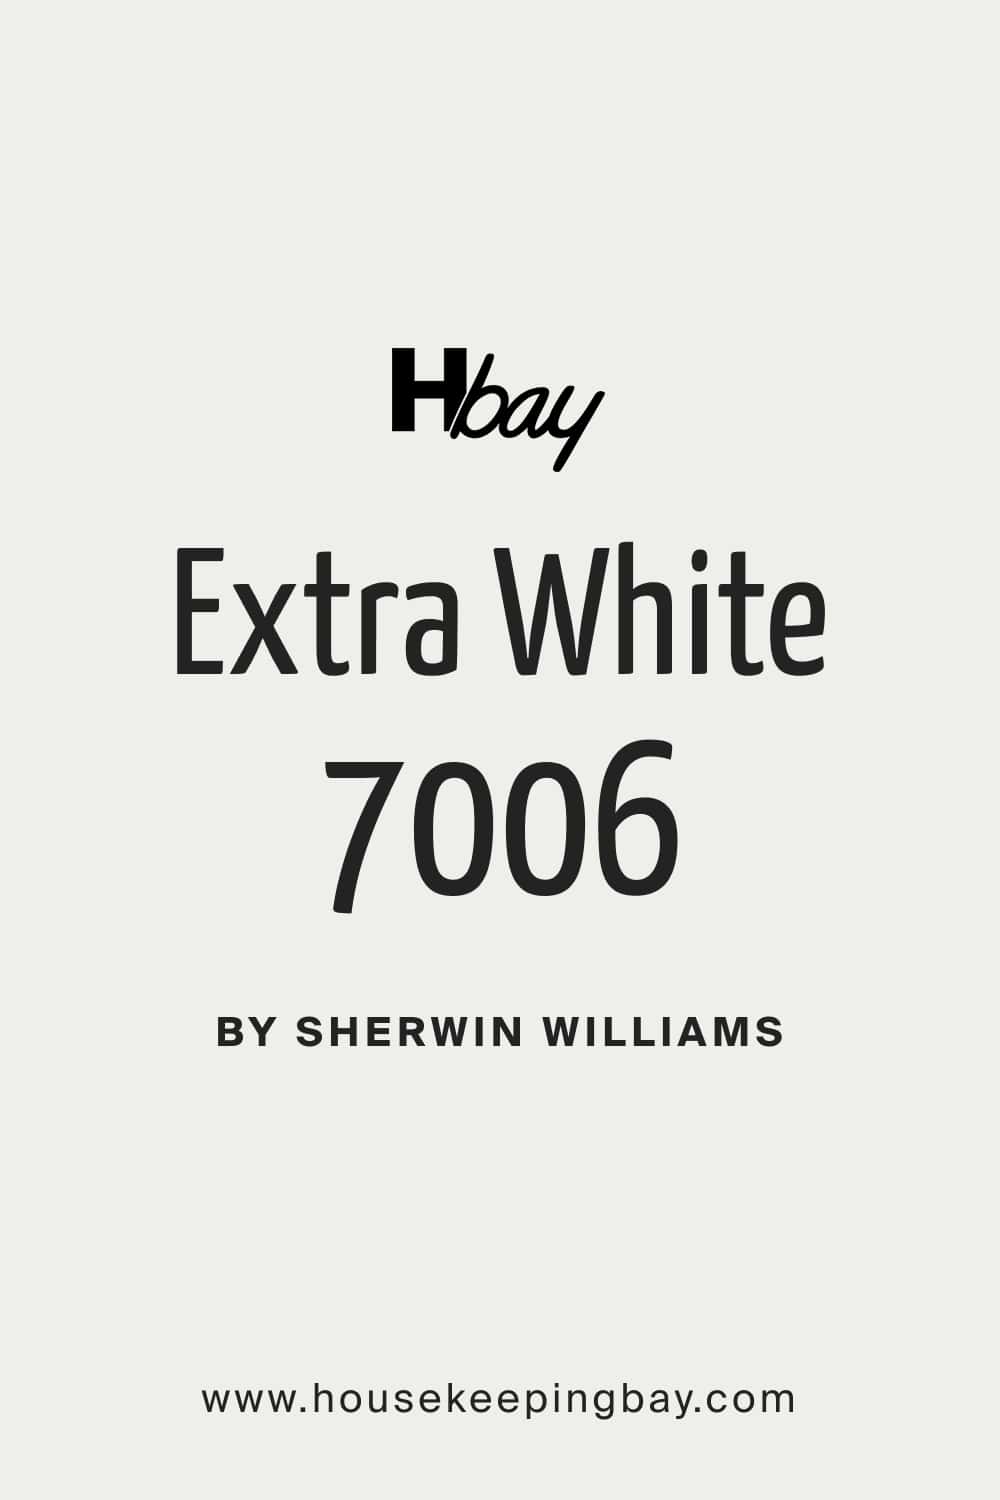 Extra White SW 7006 by Sherwin Williams